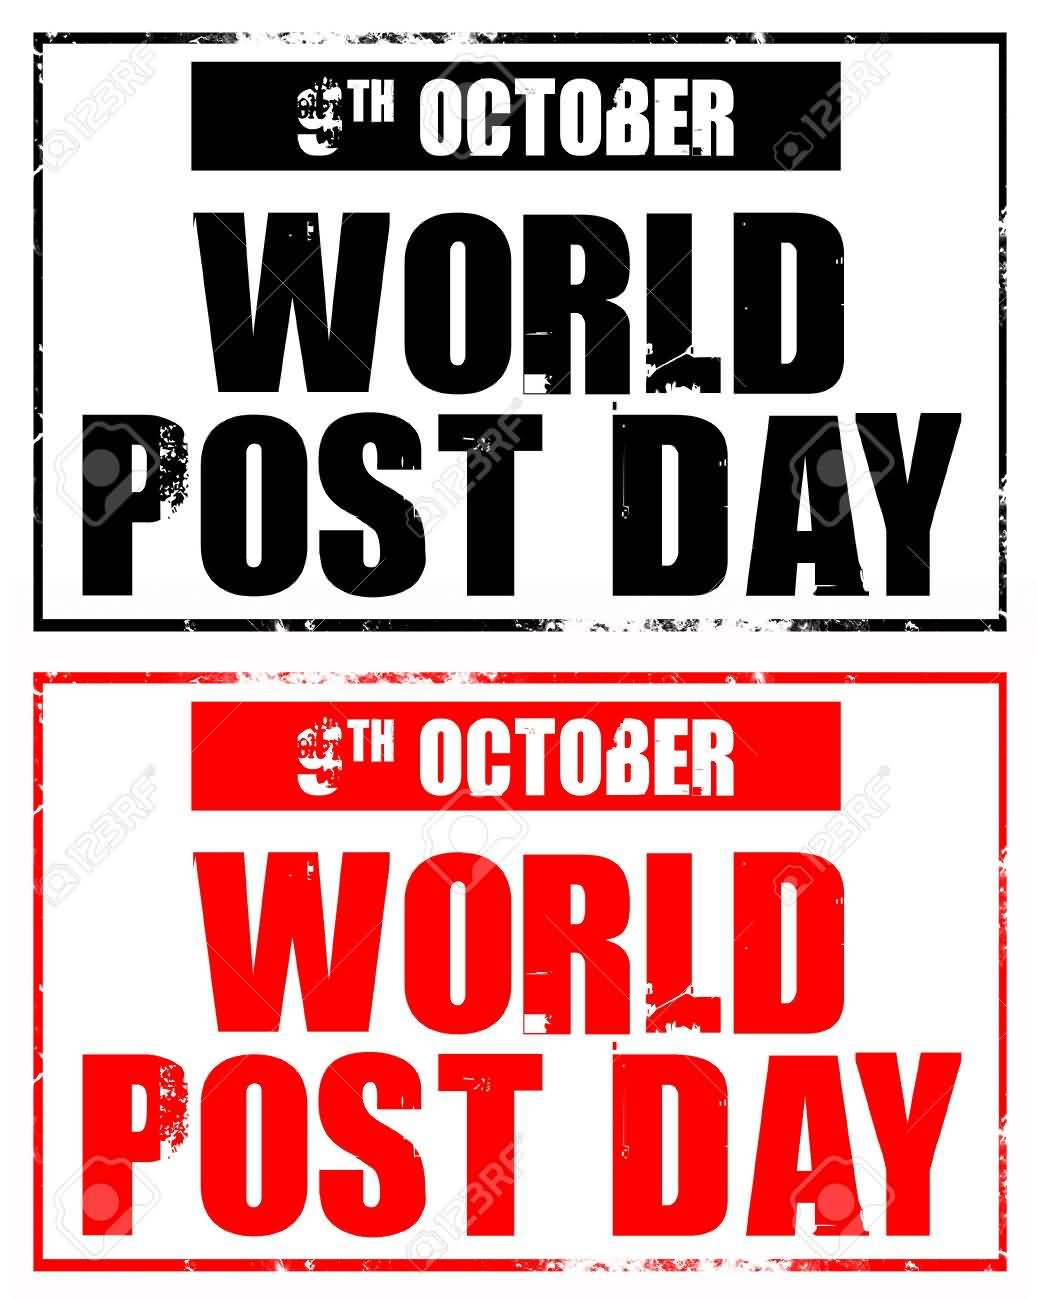 9th October World Post Day Wishes Picture